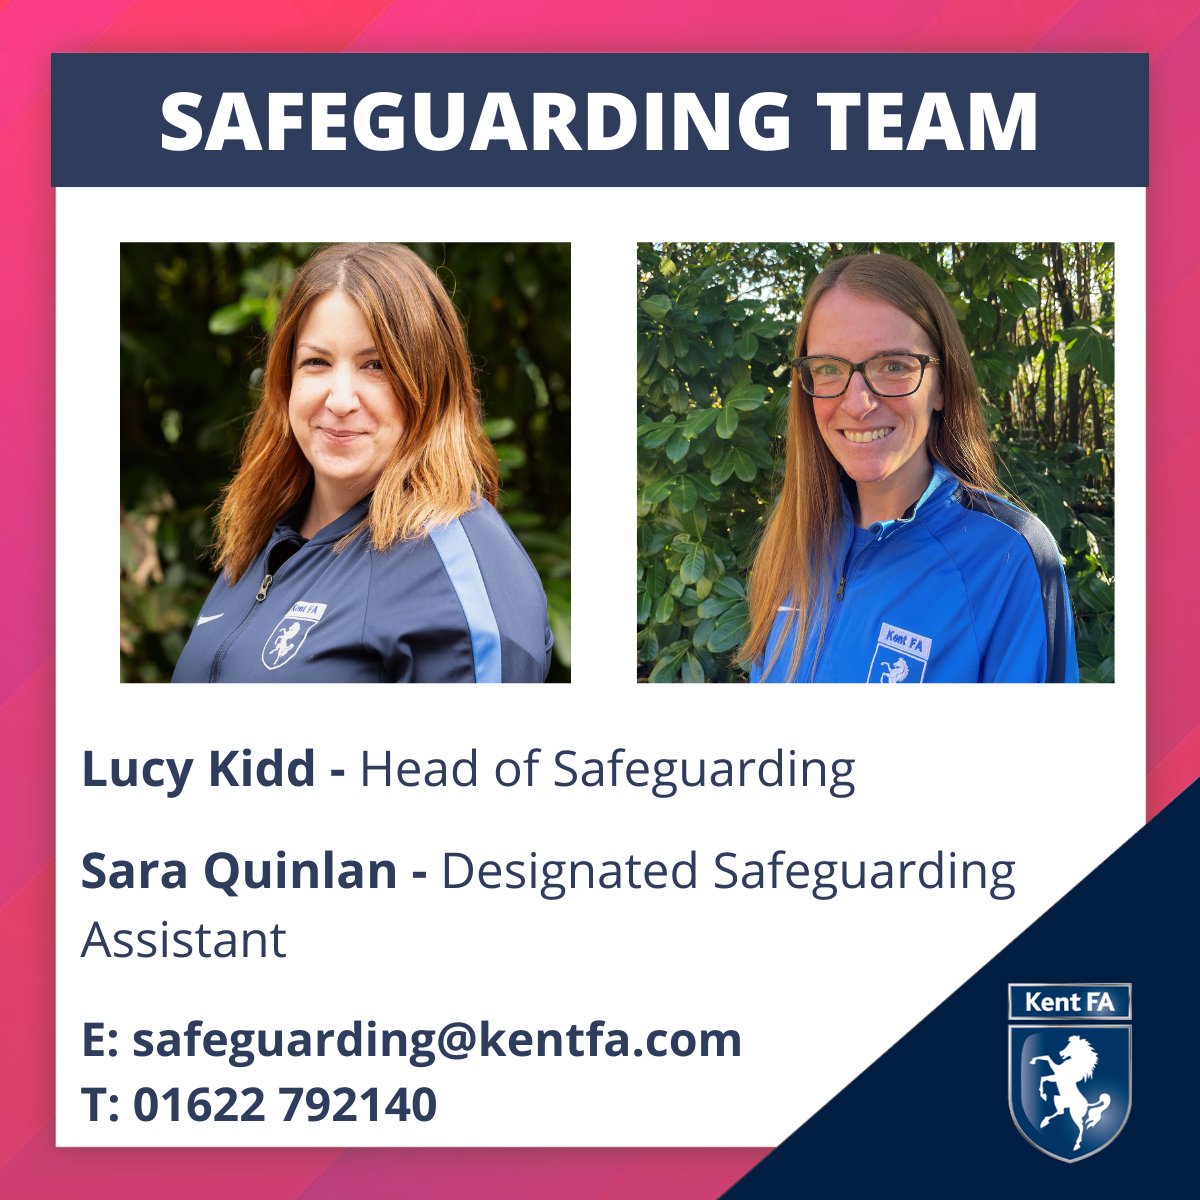 MEET THE TEAM 👥 | Safeguarding remains our key priority. If you have a concern, your first point of call is your Club or League Welfare Officer. However, you can contact our Safeguarding Team if that is not possible. 📧safeguarding@kentfa.com ☎️01622792140